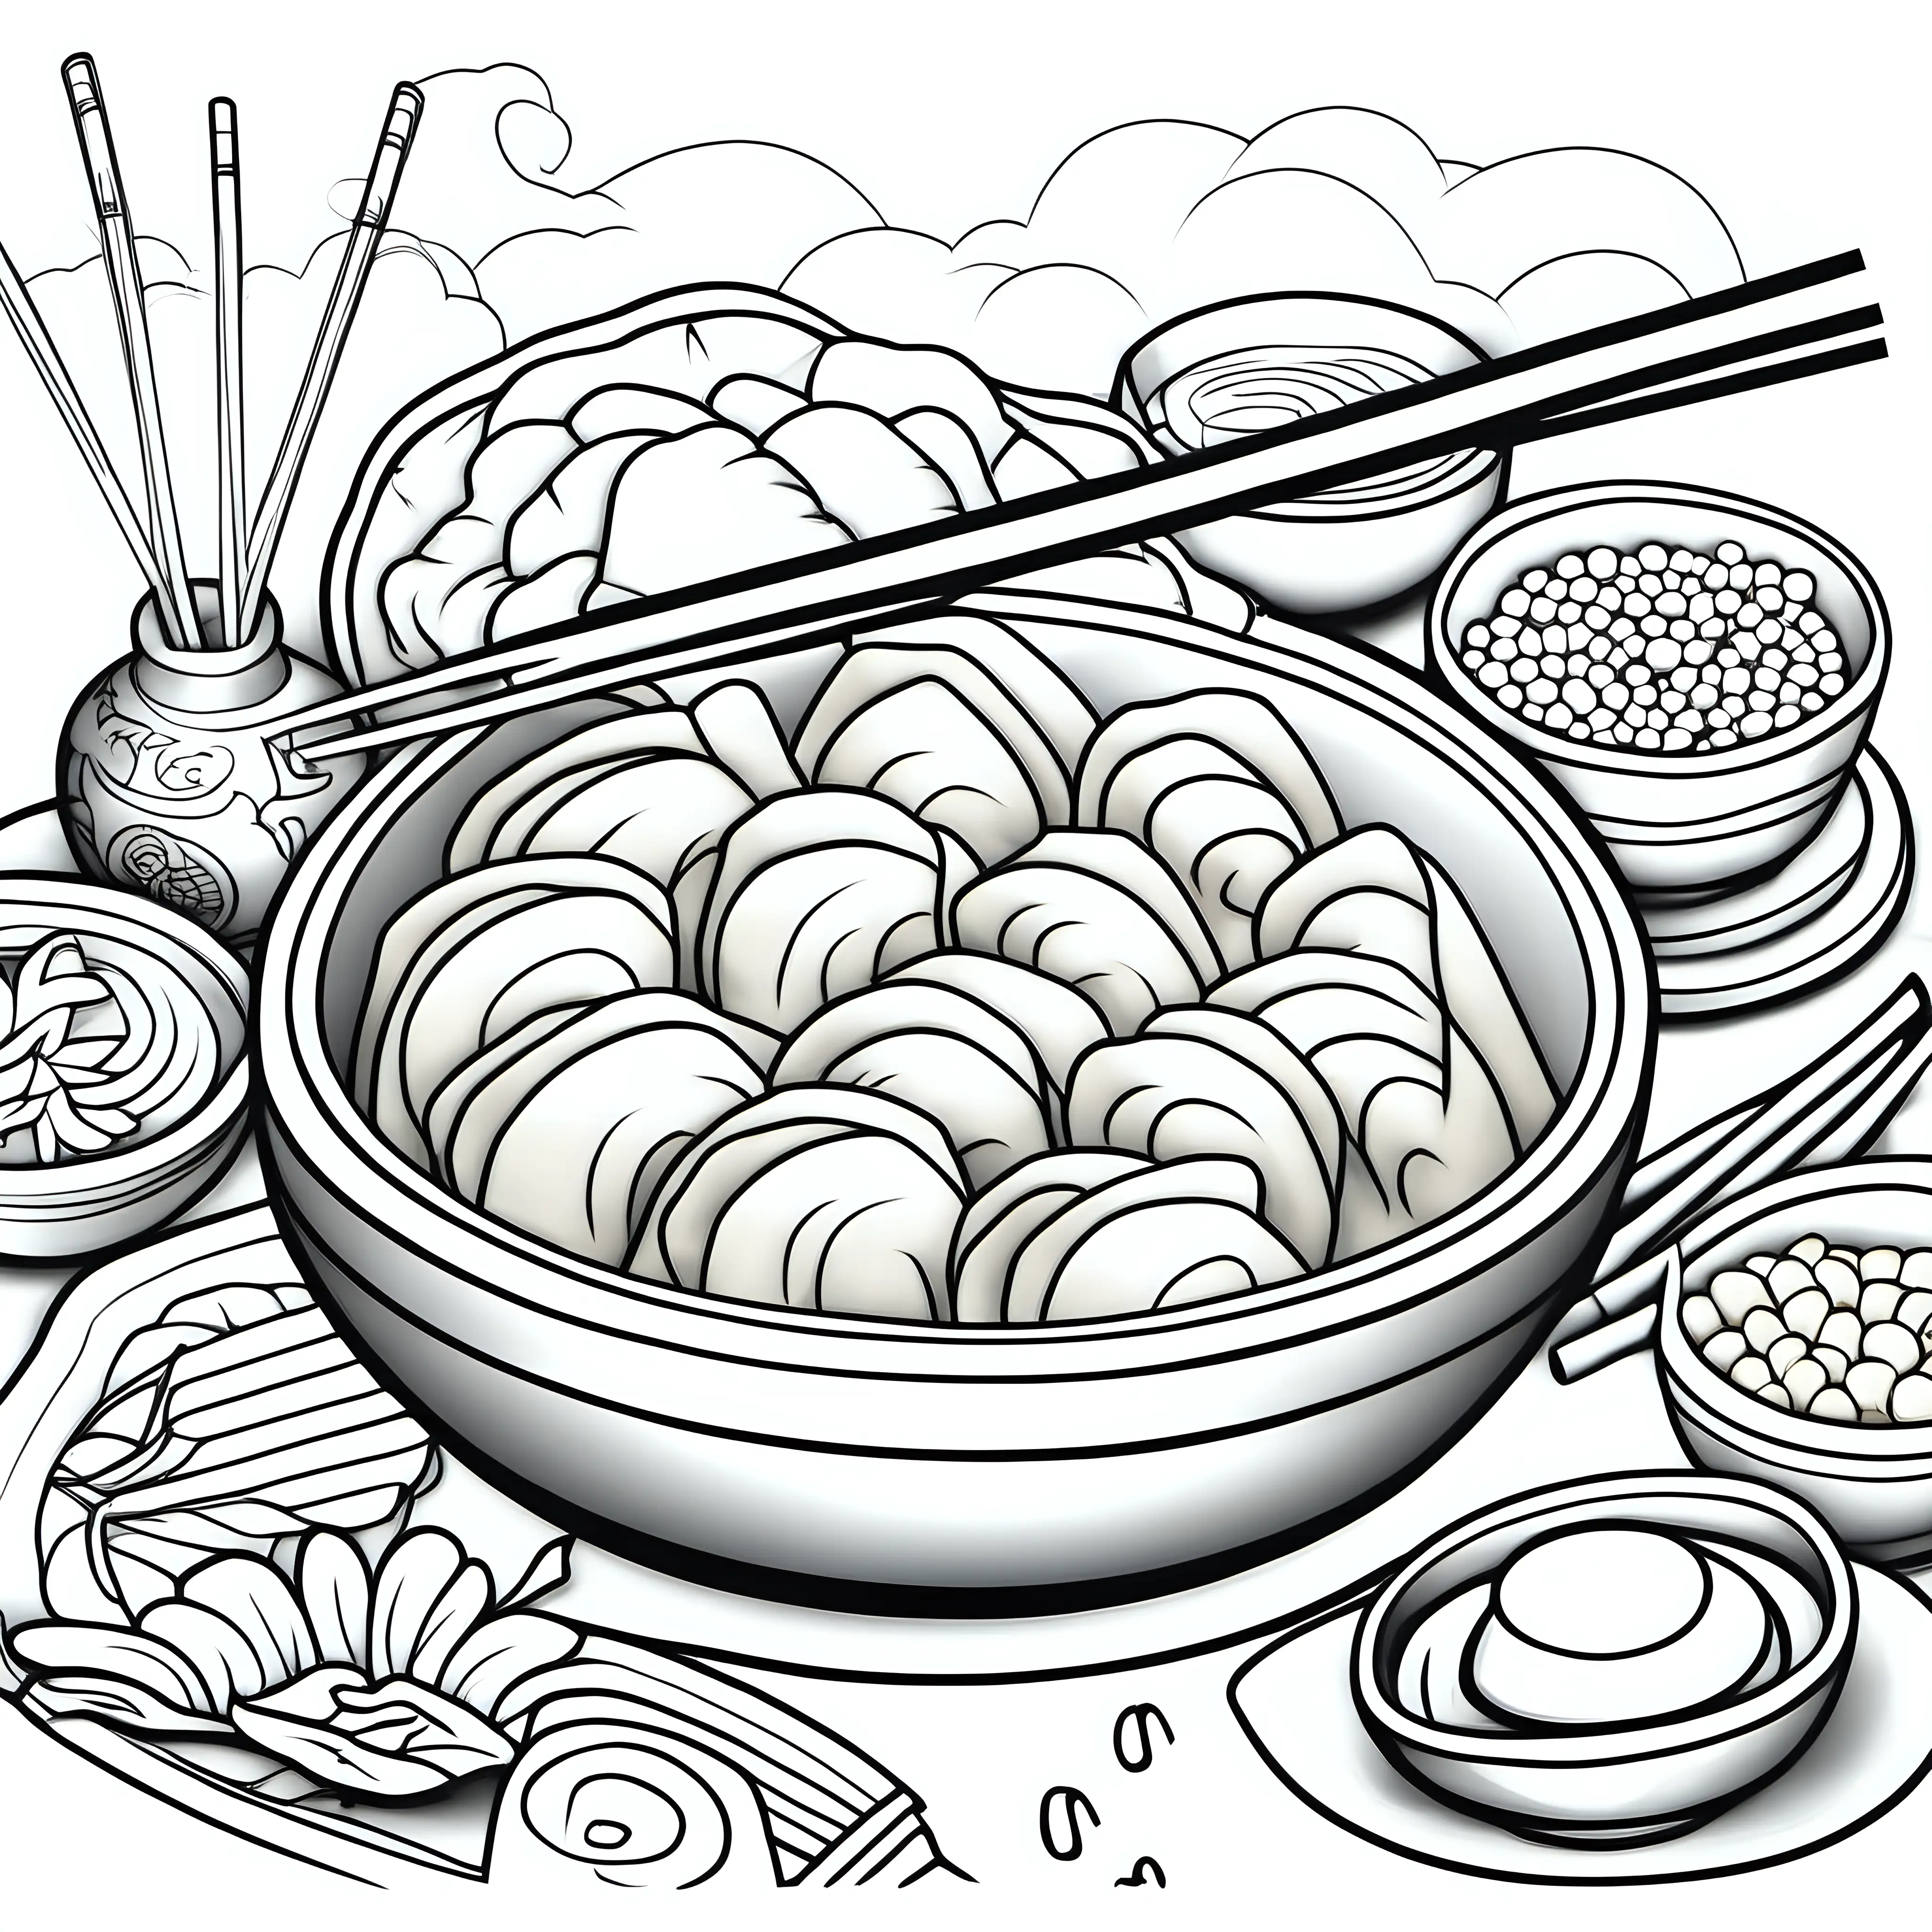 Chinese New Year Dumpling Coloring Page for Kids